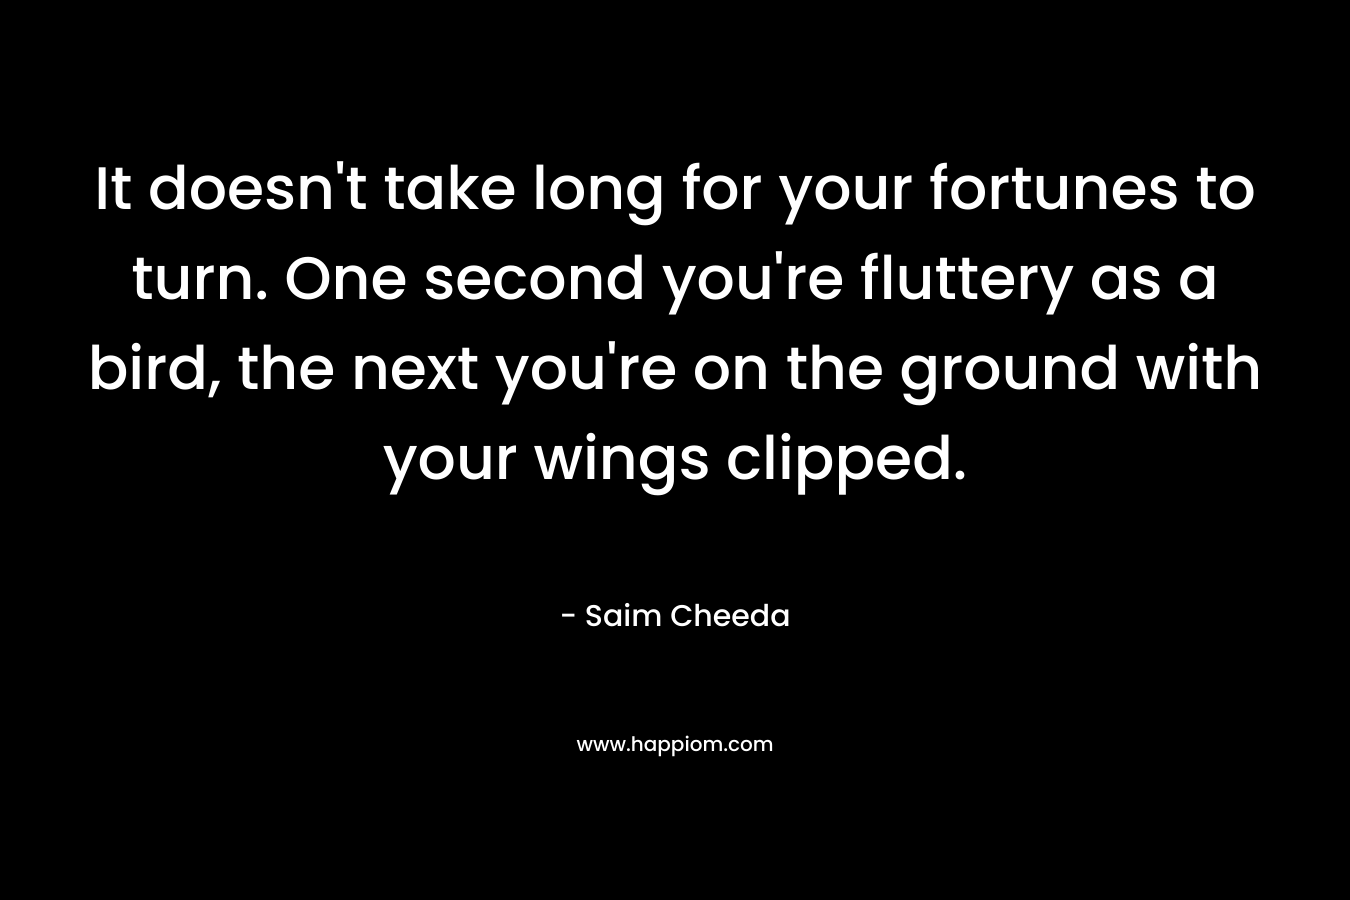 It doesn’t take long for your fortunes to turn. One second you’re fluttery as a bird, the next you’re on the ground with your wings clipped. – Saim Cheeda